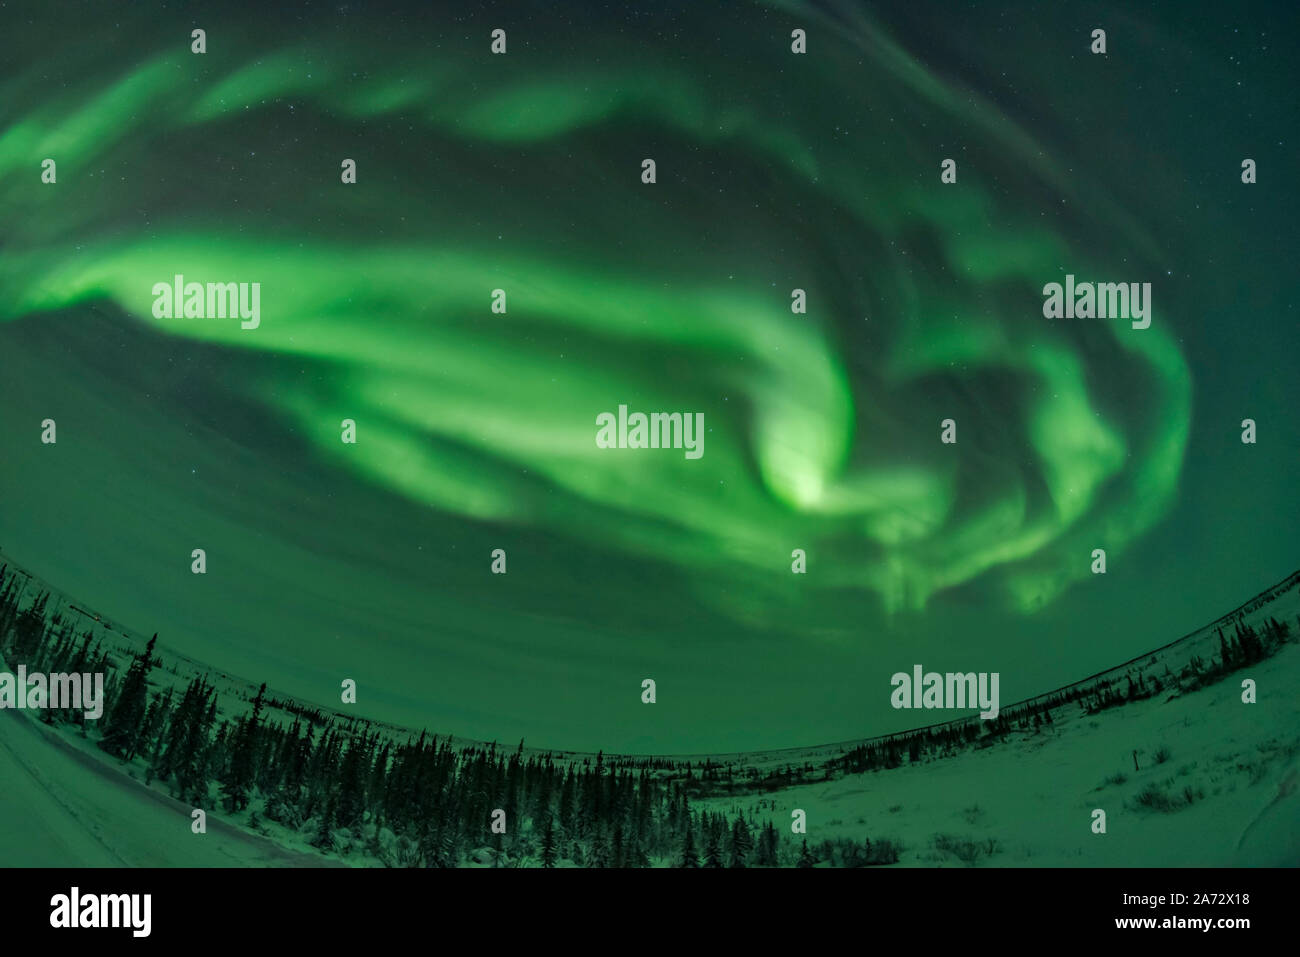 One of a short series of images showing the development of an aurora display from a classic arc into a more complex pattern of concentric arcs and wit Stock Photo